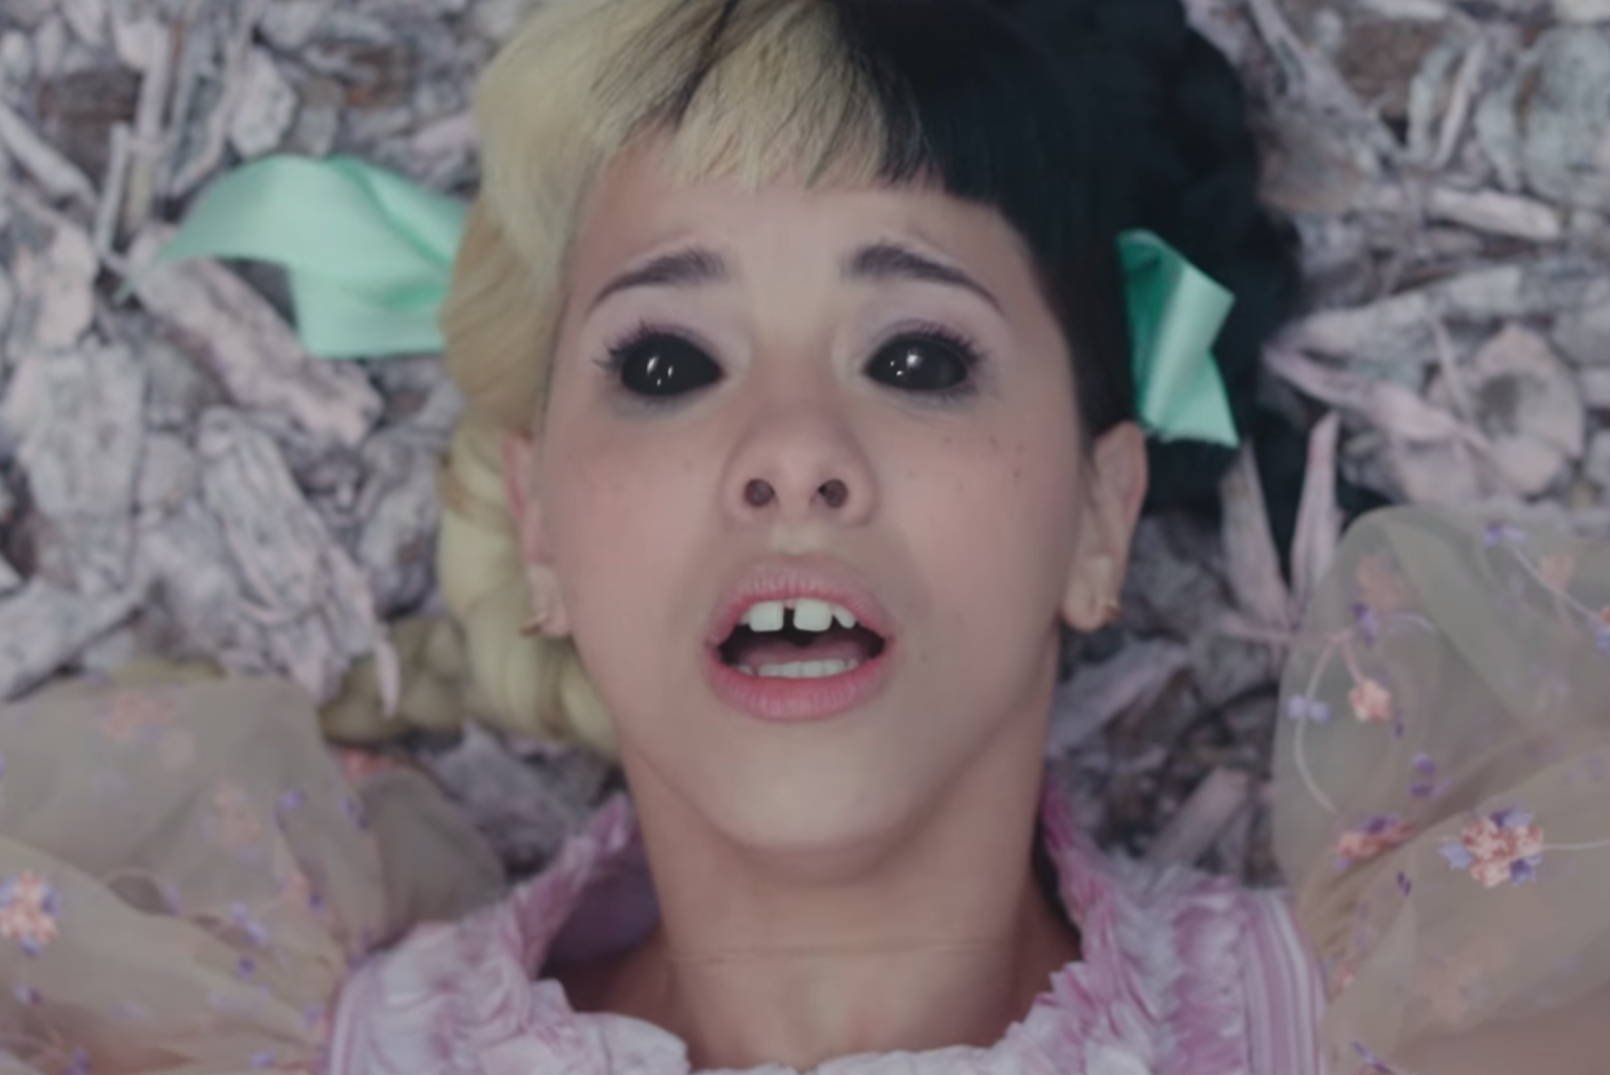 Review: 'K-12' proves it's time for Melanie Martinez to end her